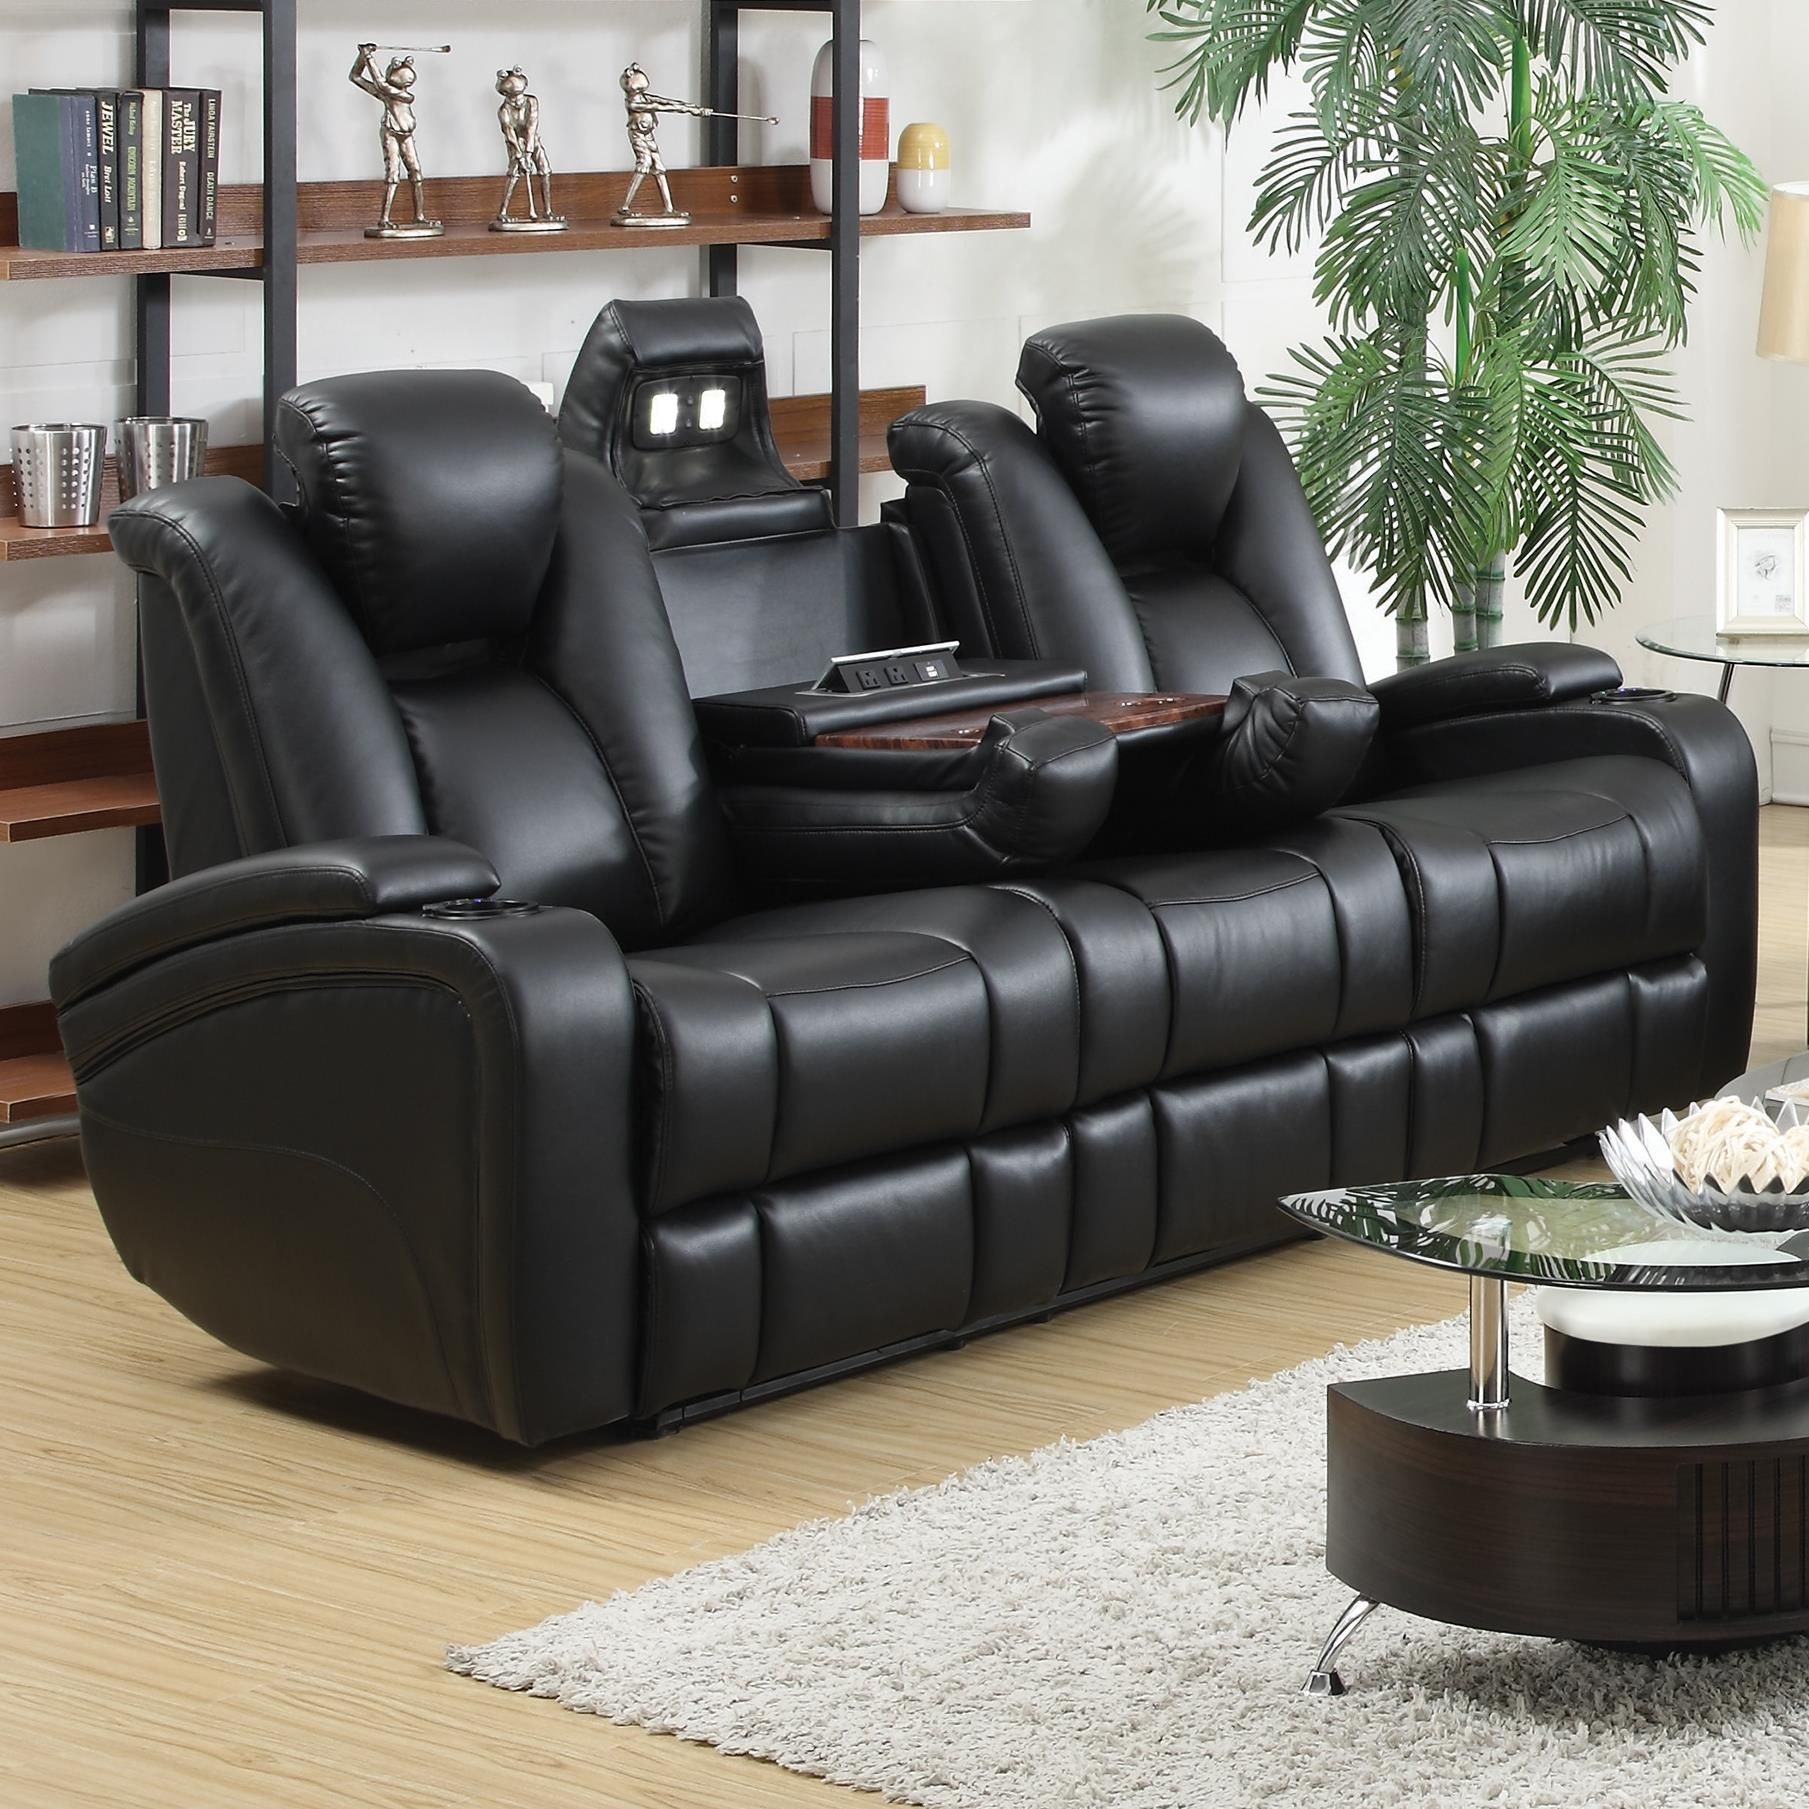 Sectional Sofas With Recliners And Cup